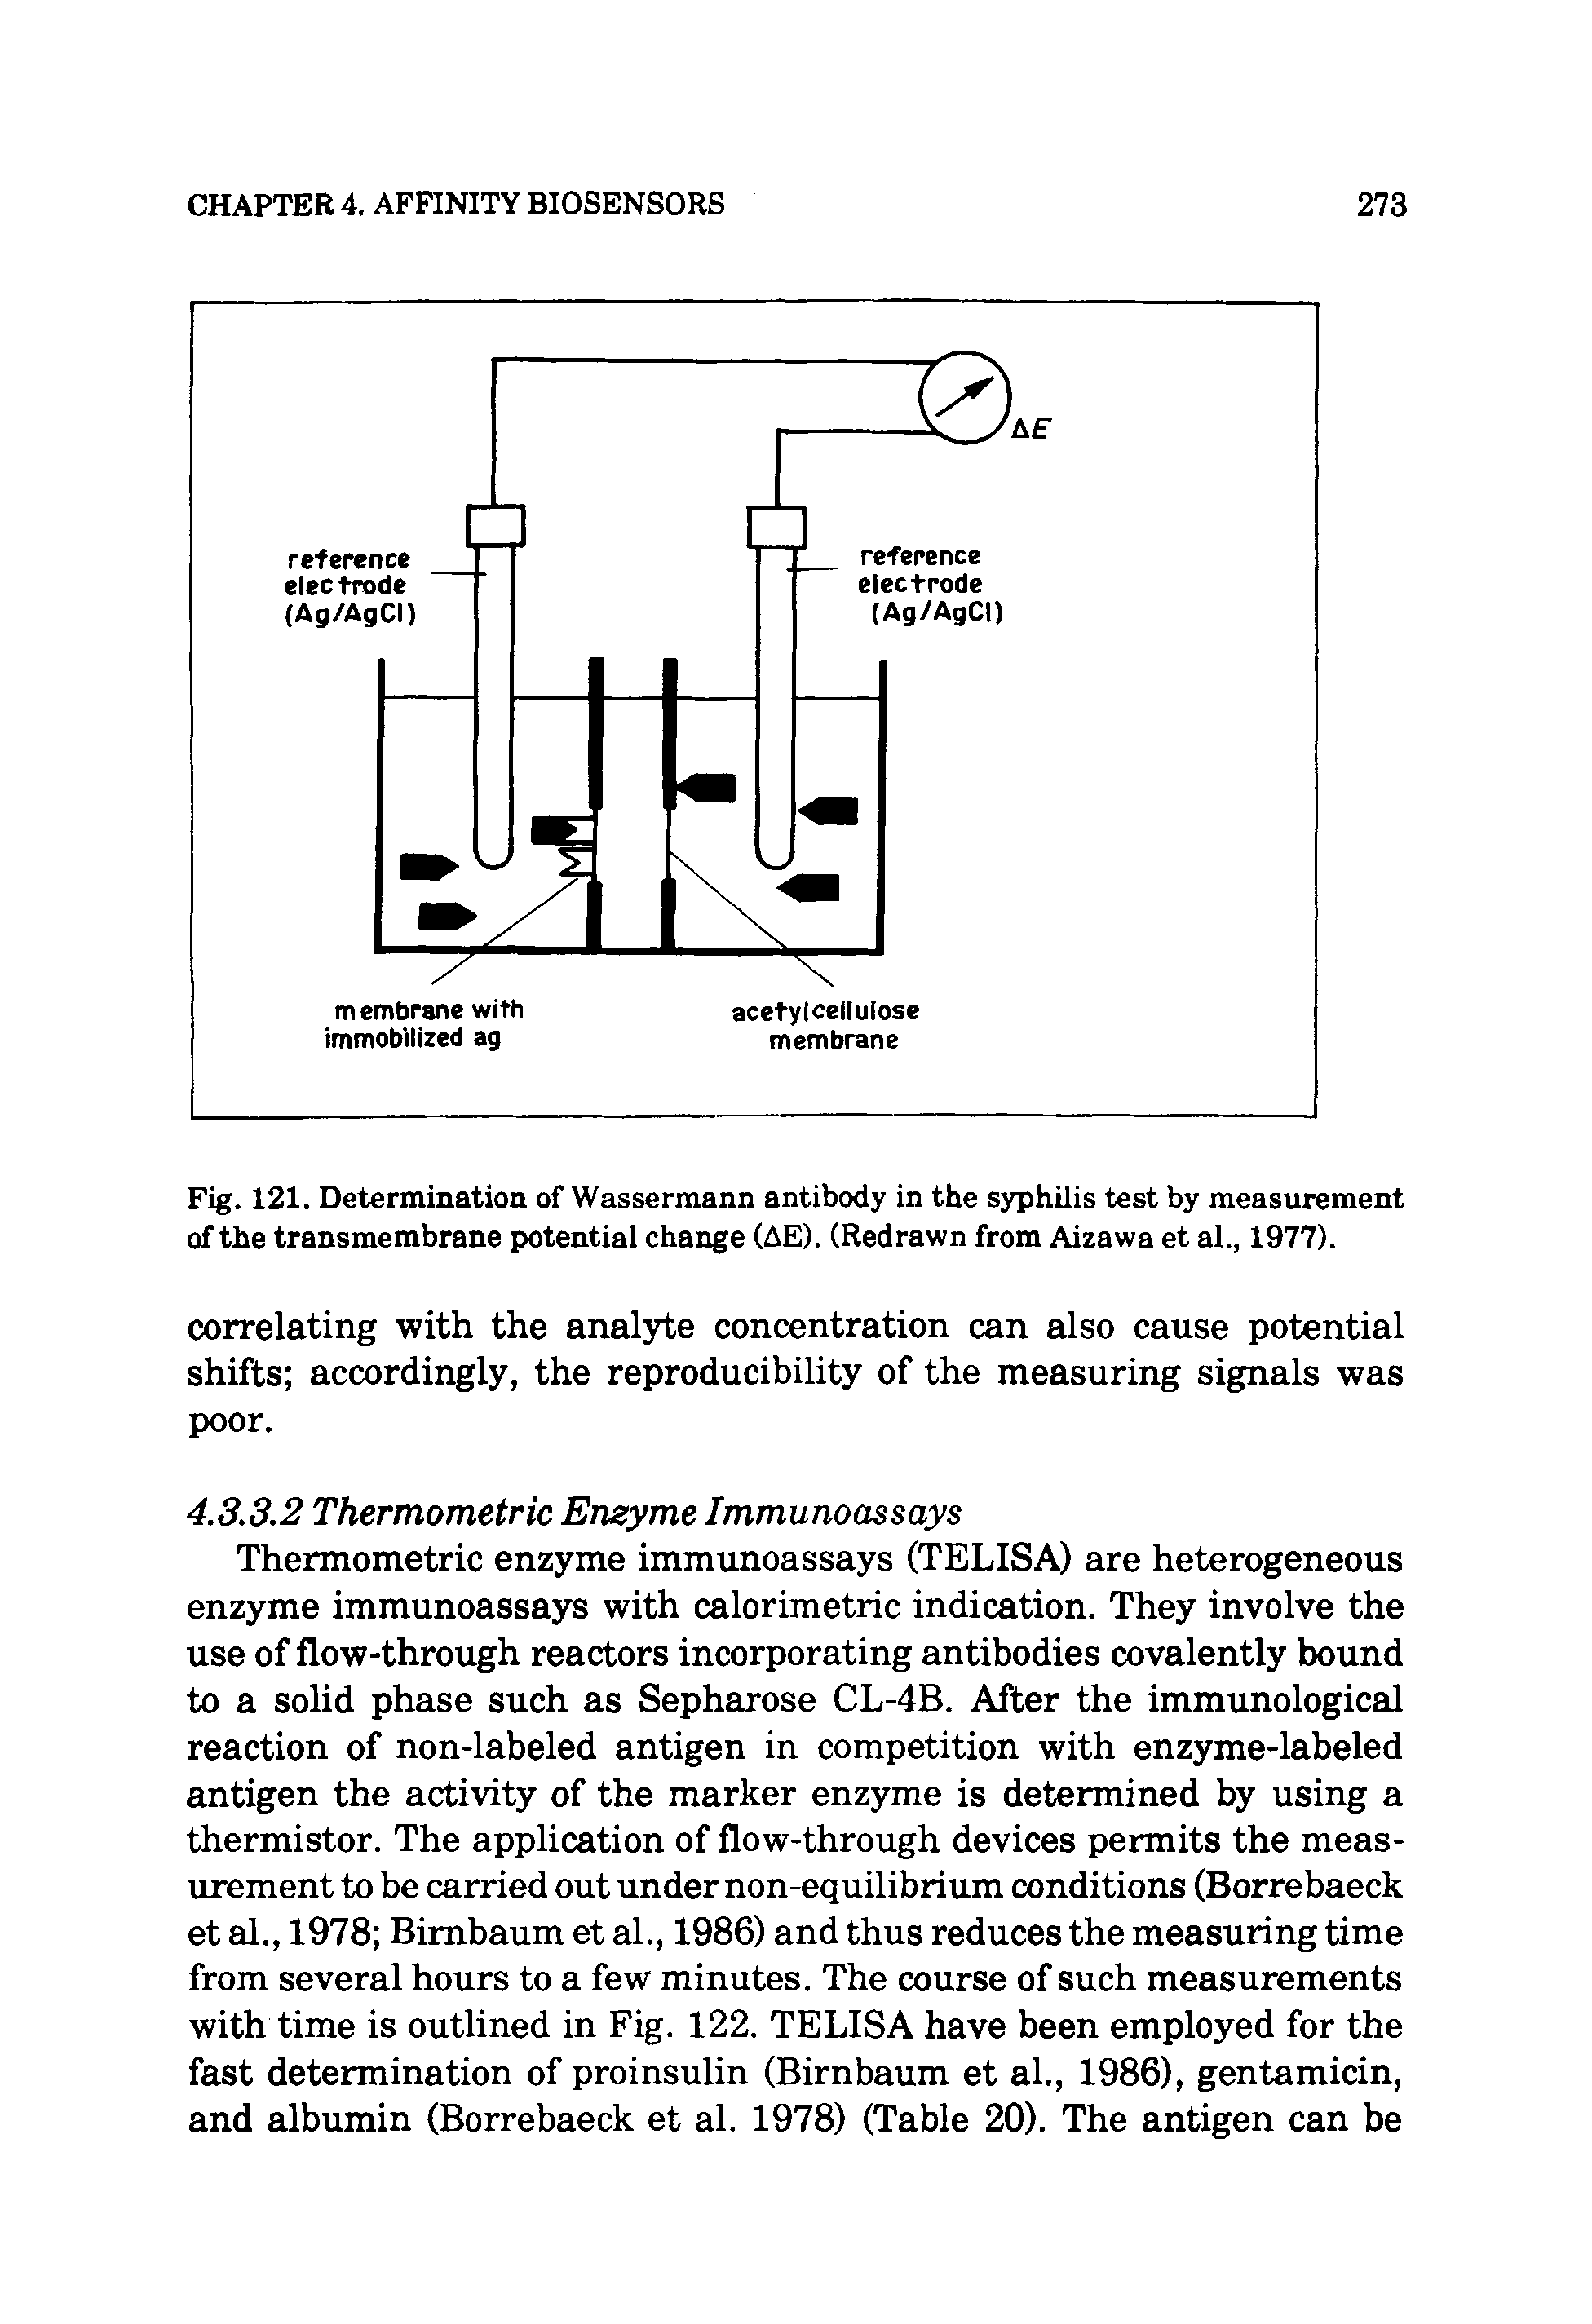 Fig. 121. Determination of Wassermann antibody in the syphilis test by measurement of the transmembrane potential change (AE). (Redrawn from Aizawa et al., 1977).